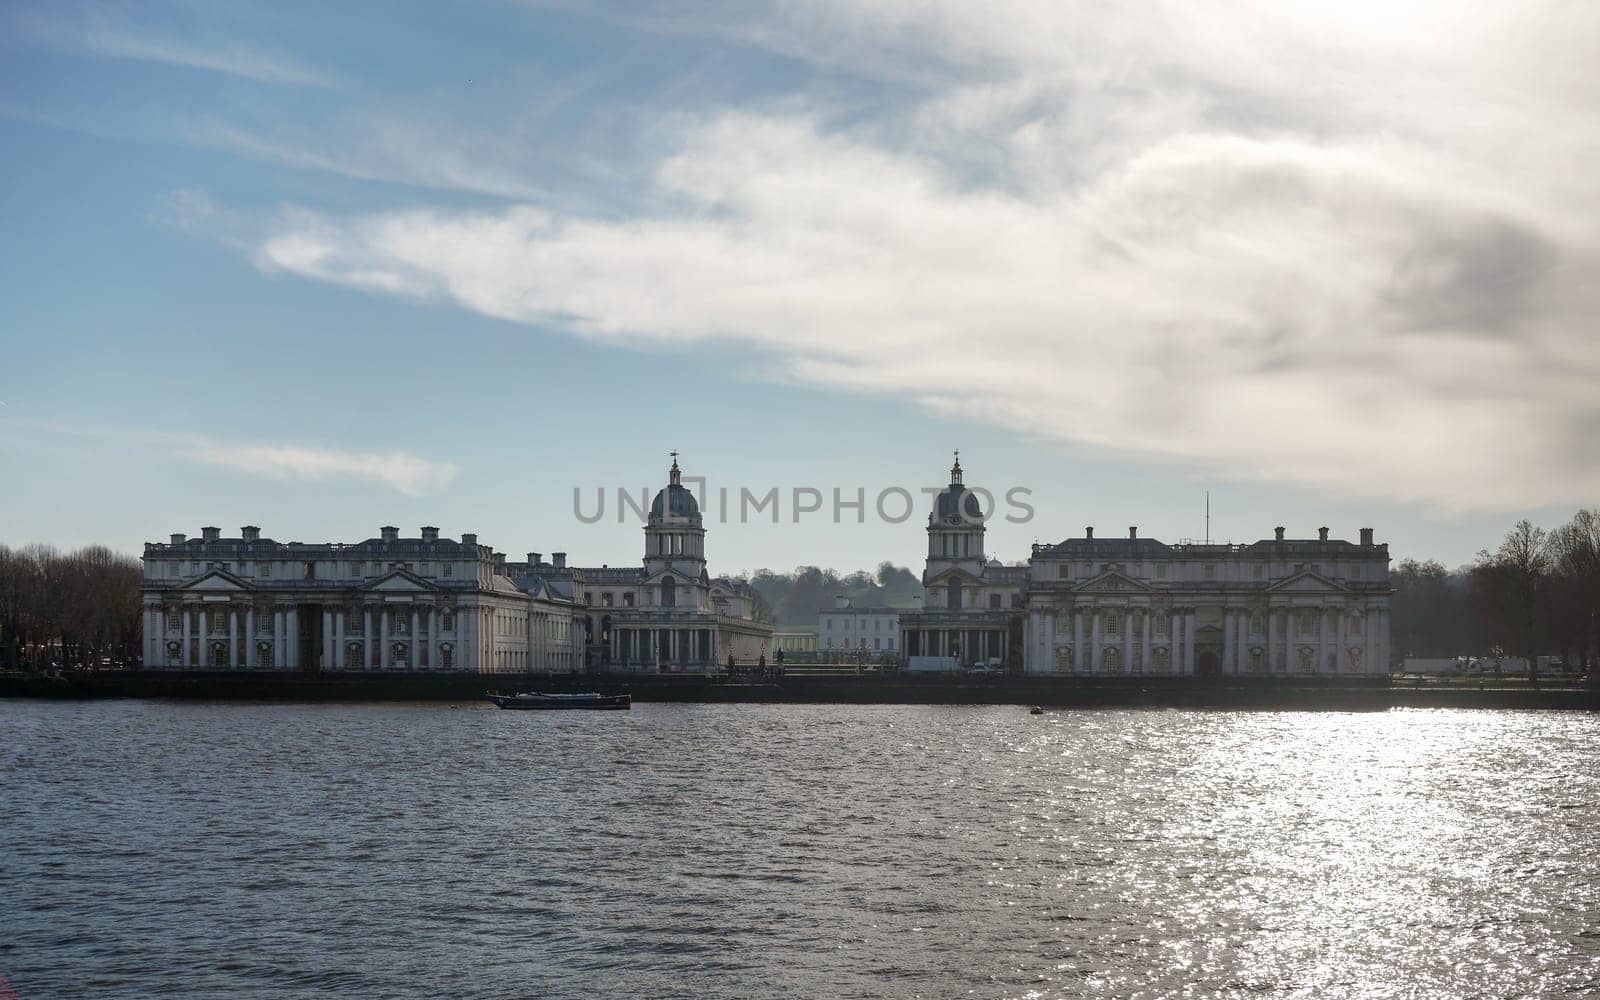 Royal Hospital School) over river Thames, on winter morning - strong sun backlight reflects in water. by Ivanko